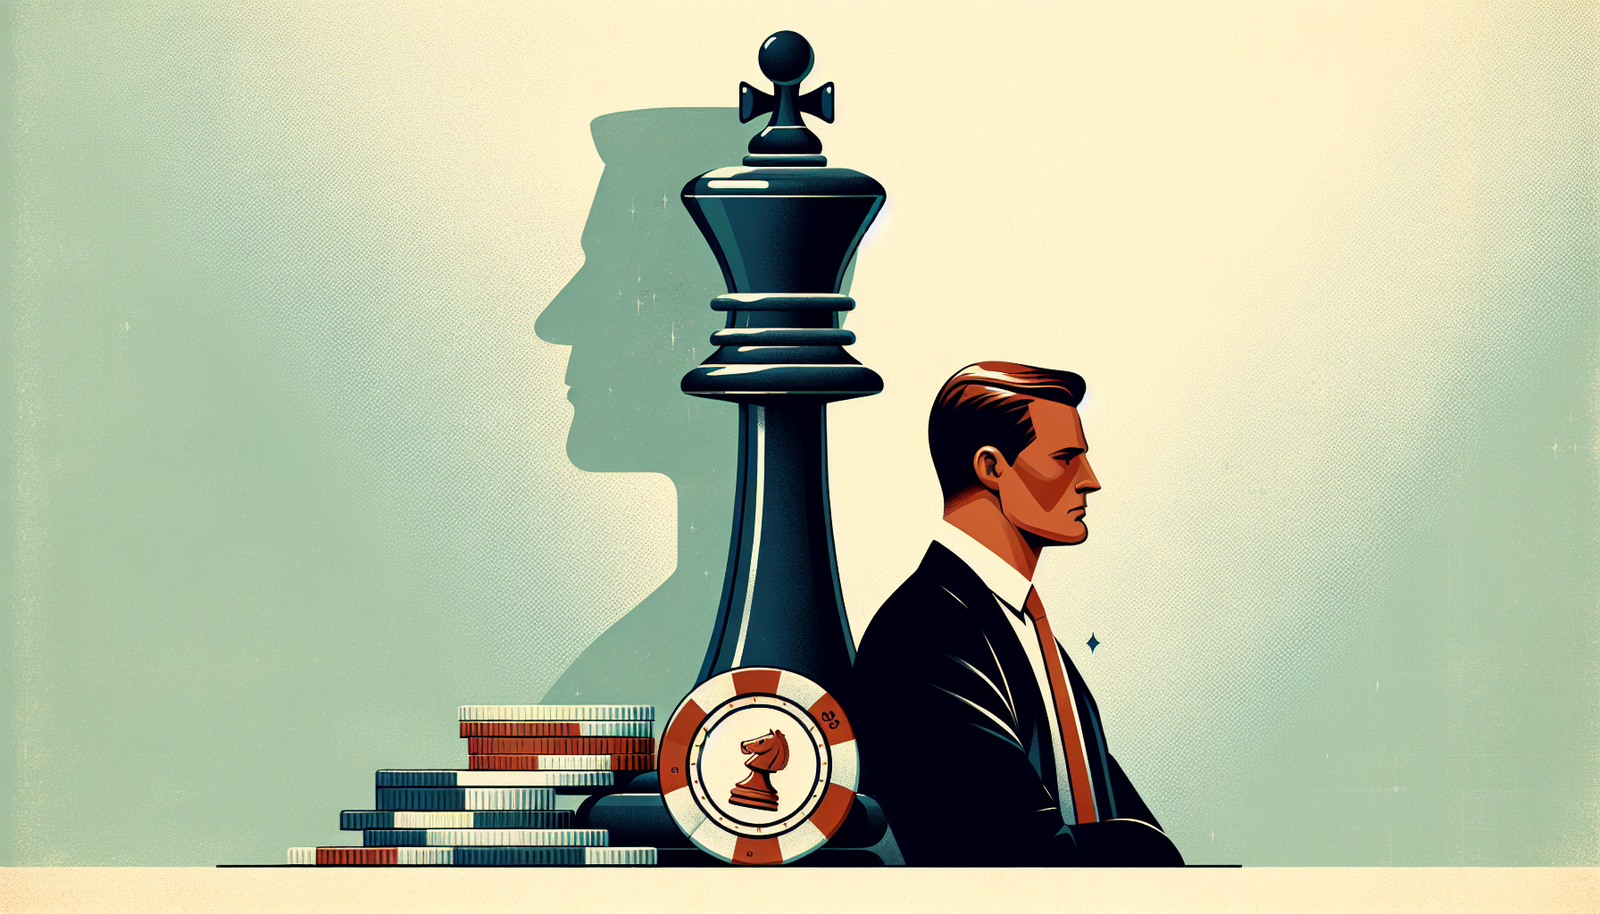 Generate a wide, professional digital illustration suitable as a feature image for an article. The design should showcase a sleek, modern look with a minimalist, sophisticated style. Imagine a betting scenario, ideally, an abstract representation of a confident bettor outsmarting an overconfident bookie. Think of chess pieces or coins that could subtly represent this. The background should be subtle, using soft, muted colors. Perfect for a professional article header but without any text printed on it.